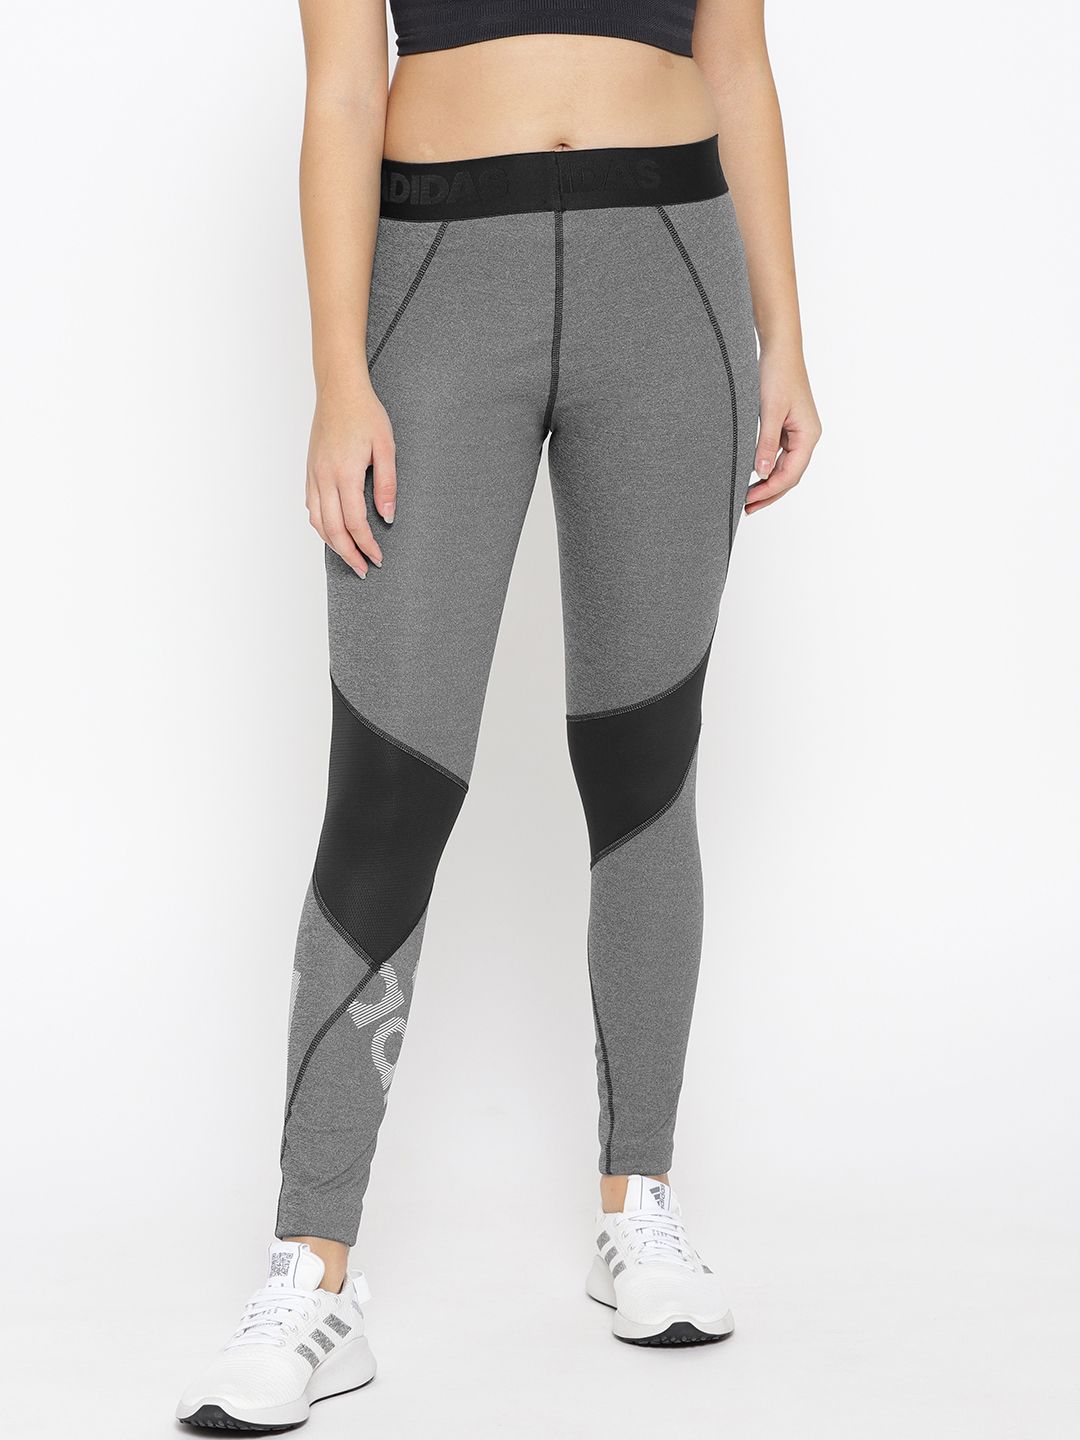 ADIDAS Women Charcoal Grey Alphaskin Badge of Sports Training Tights Price in India